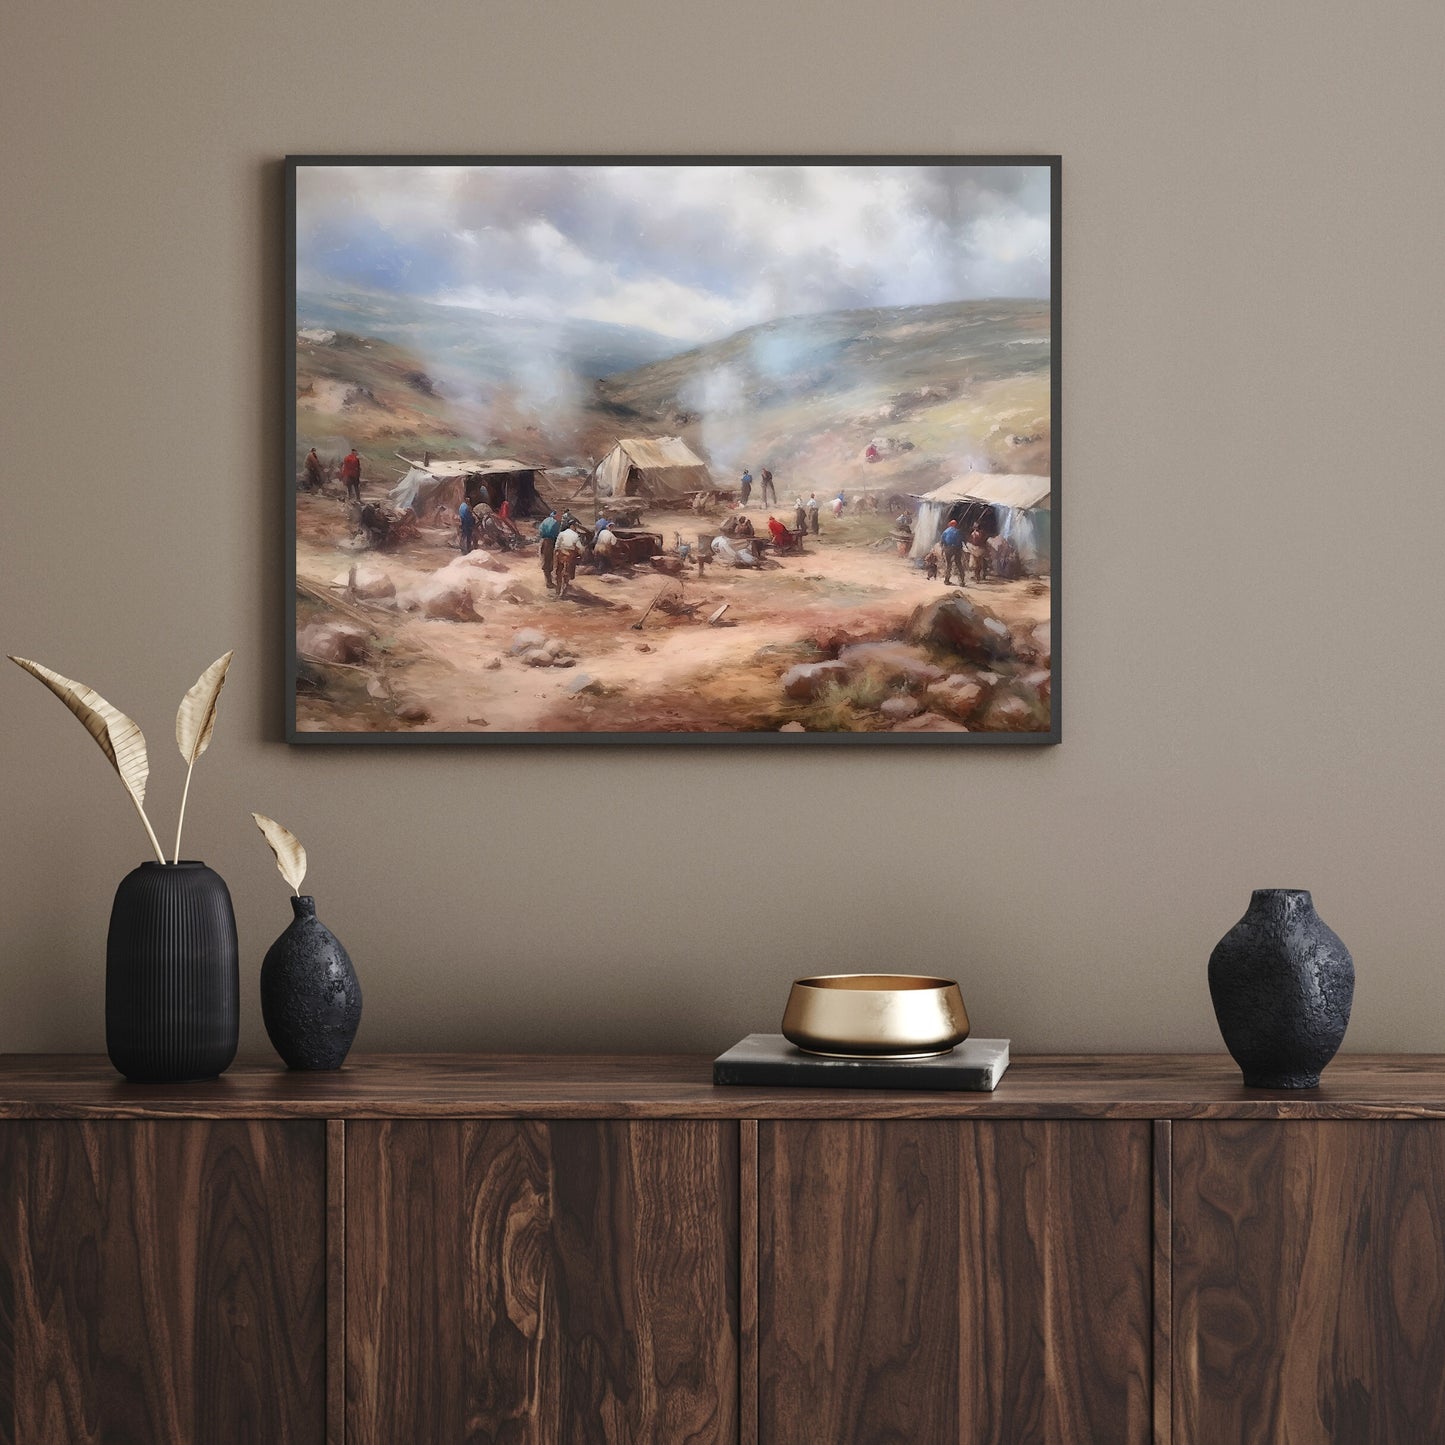 Vintage Wild West Paper Poster Prints Wall Art Small Settler Camp in the Frontier, Pioneer days, Soft Pale Colors, Wild West Art